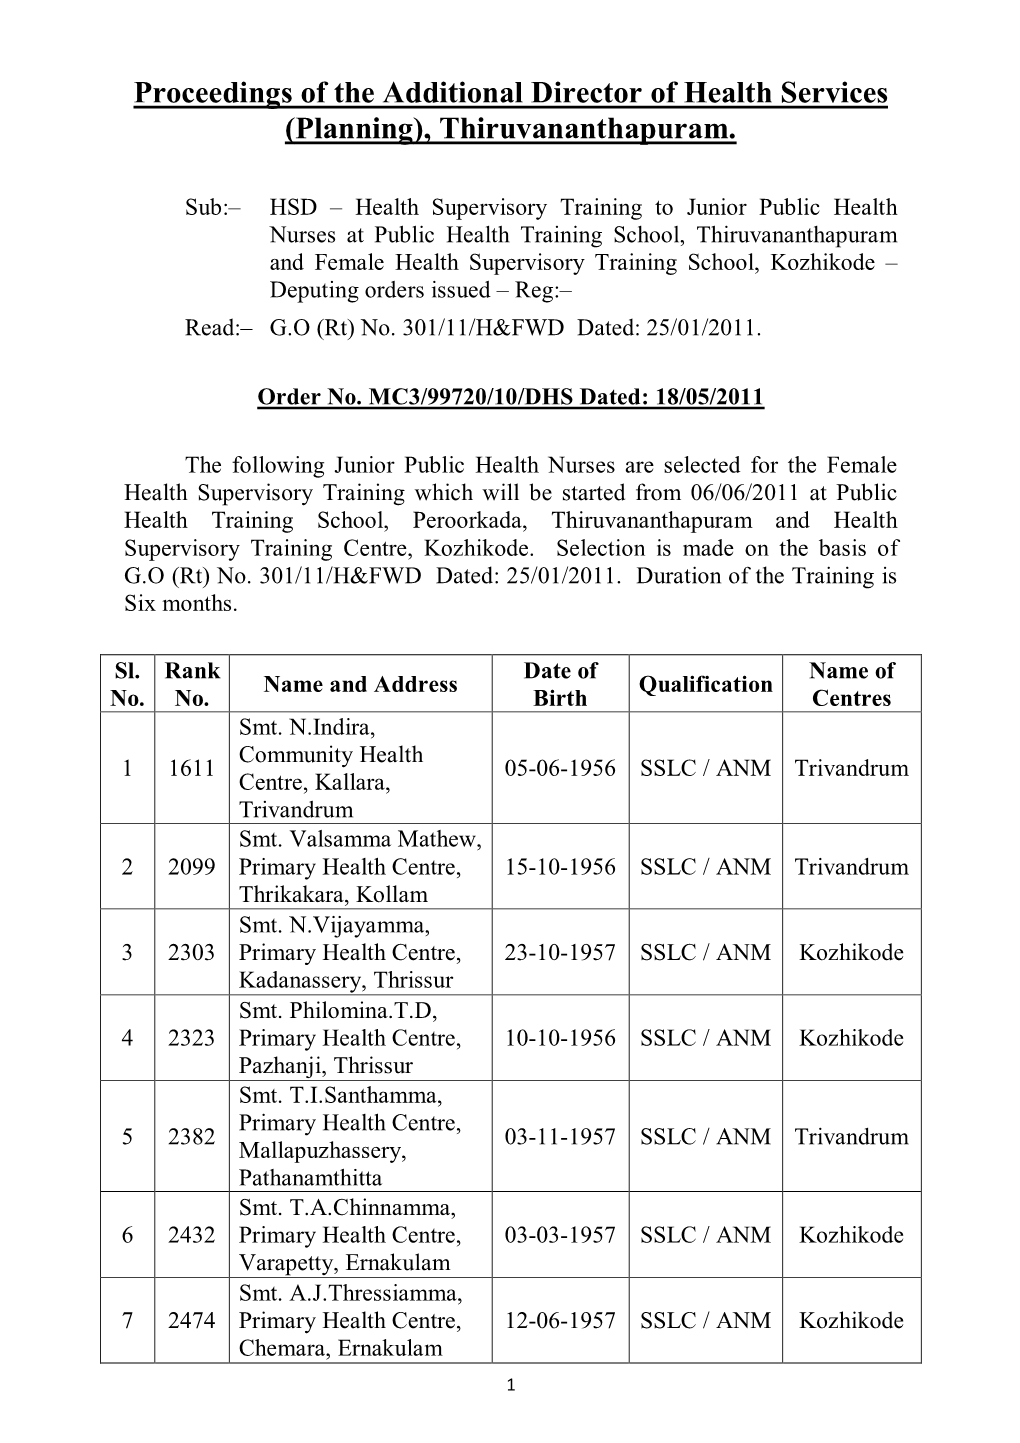 Proceedings of the Additional Director of Health Services (Planning), Thiruvananthapuram